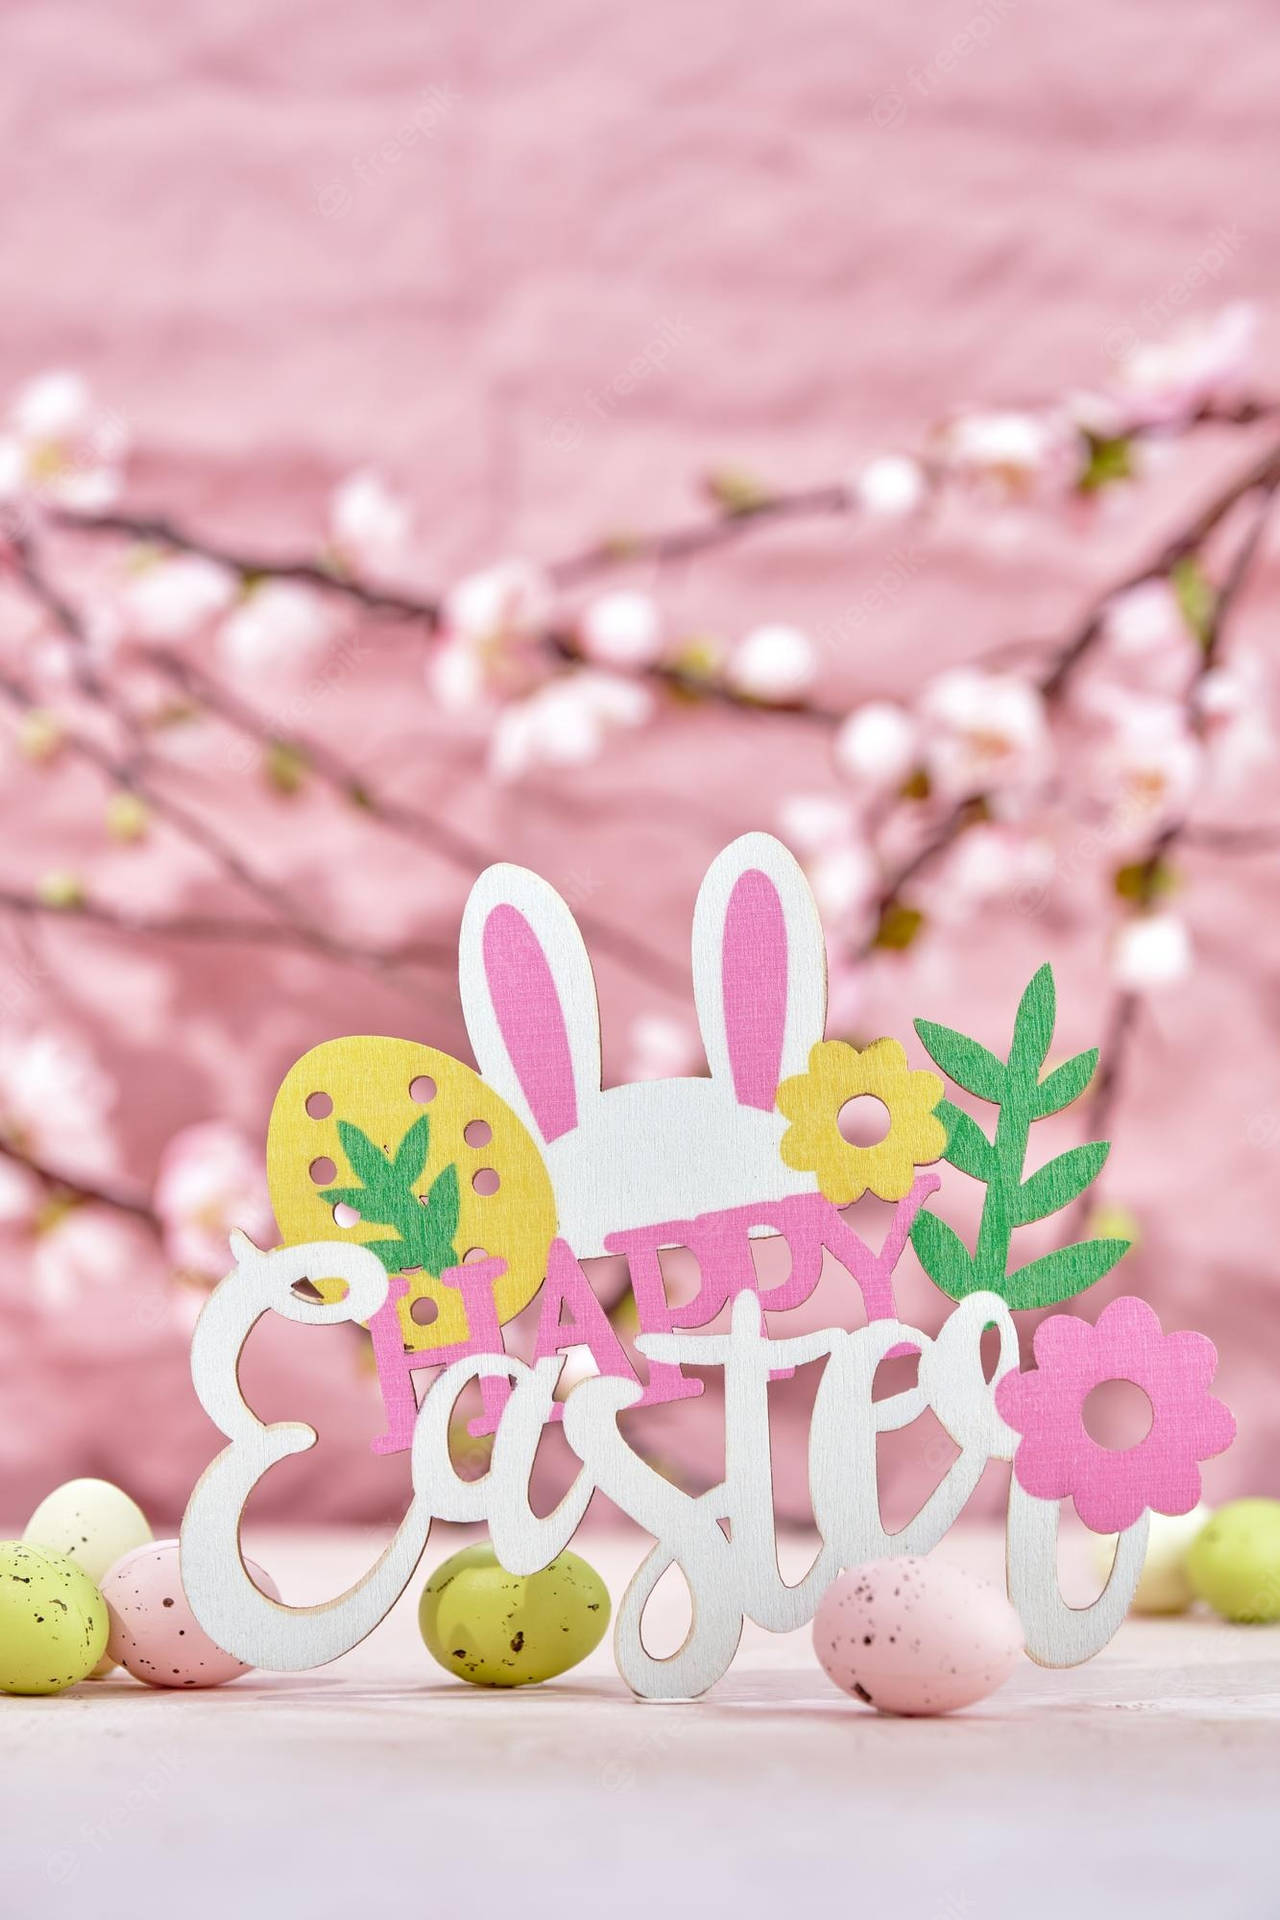 100+] Easter Iphone Wallpapers | Wallpapers.com